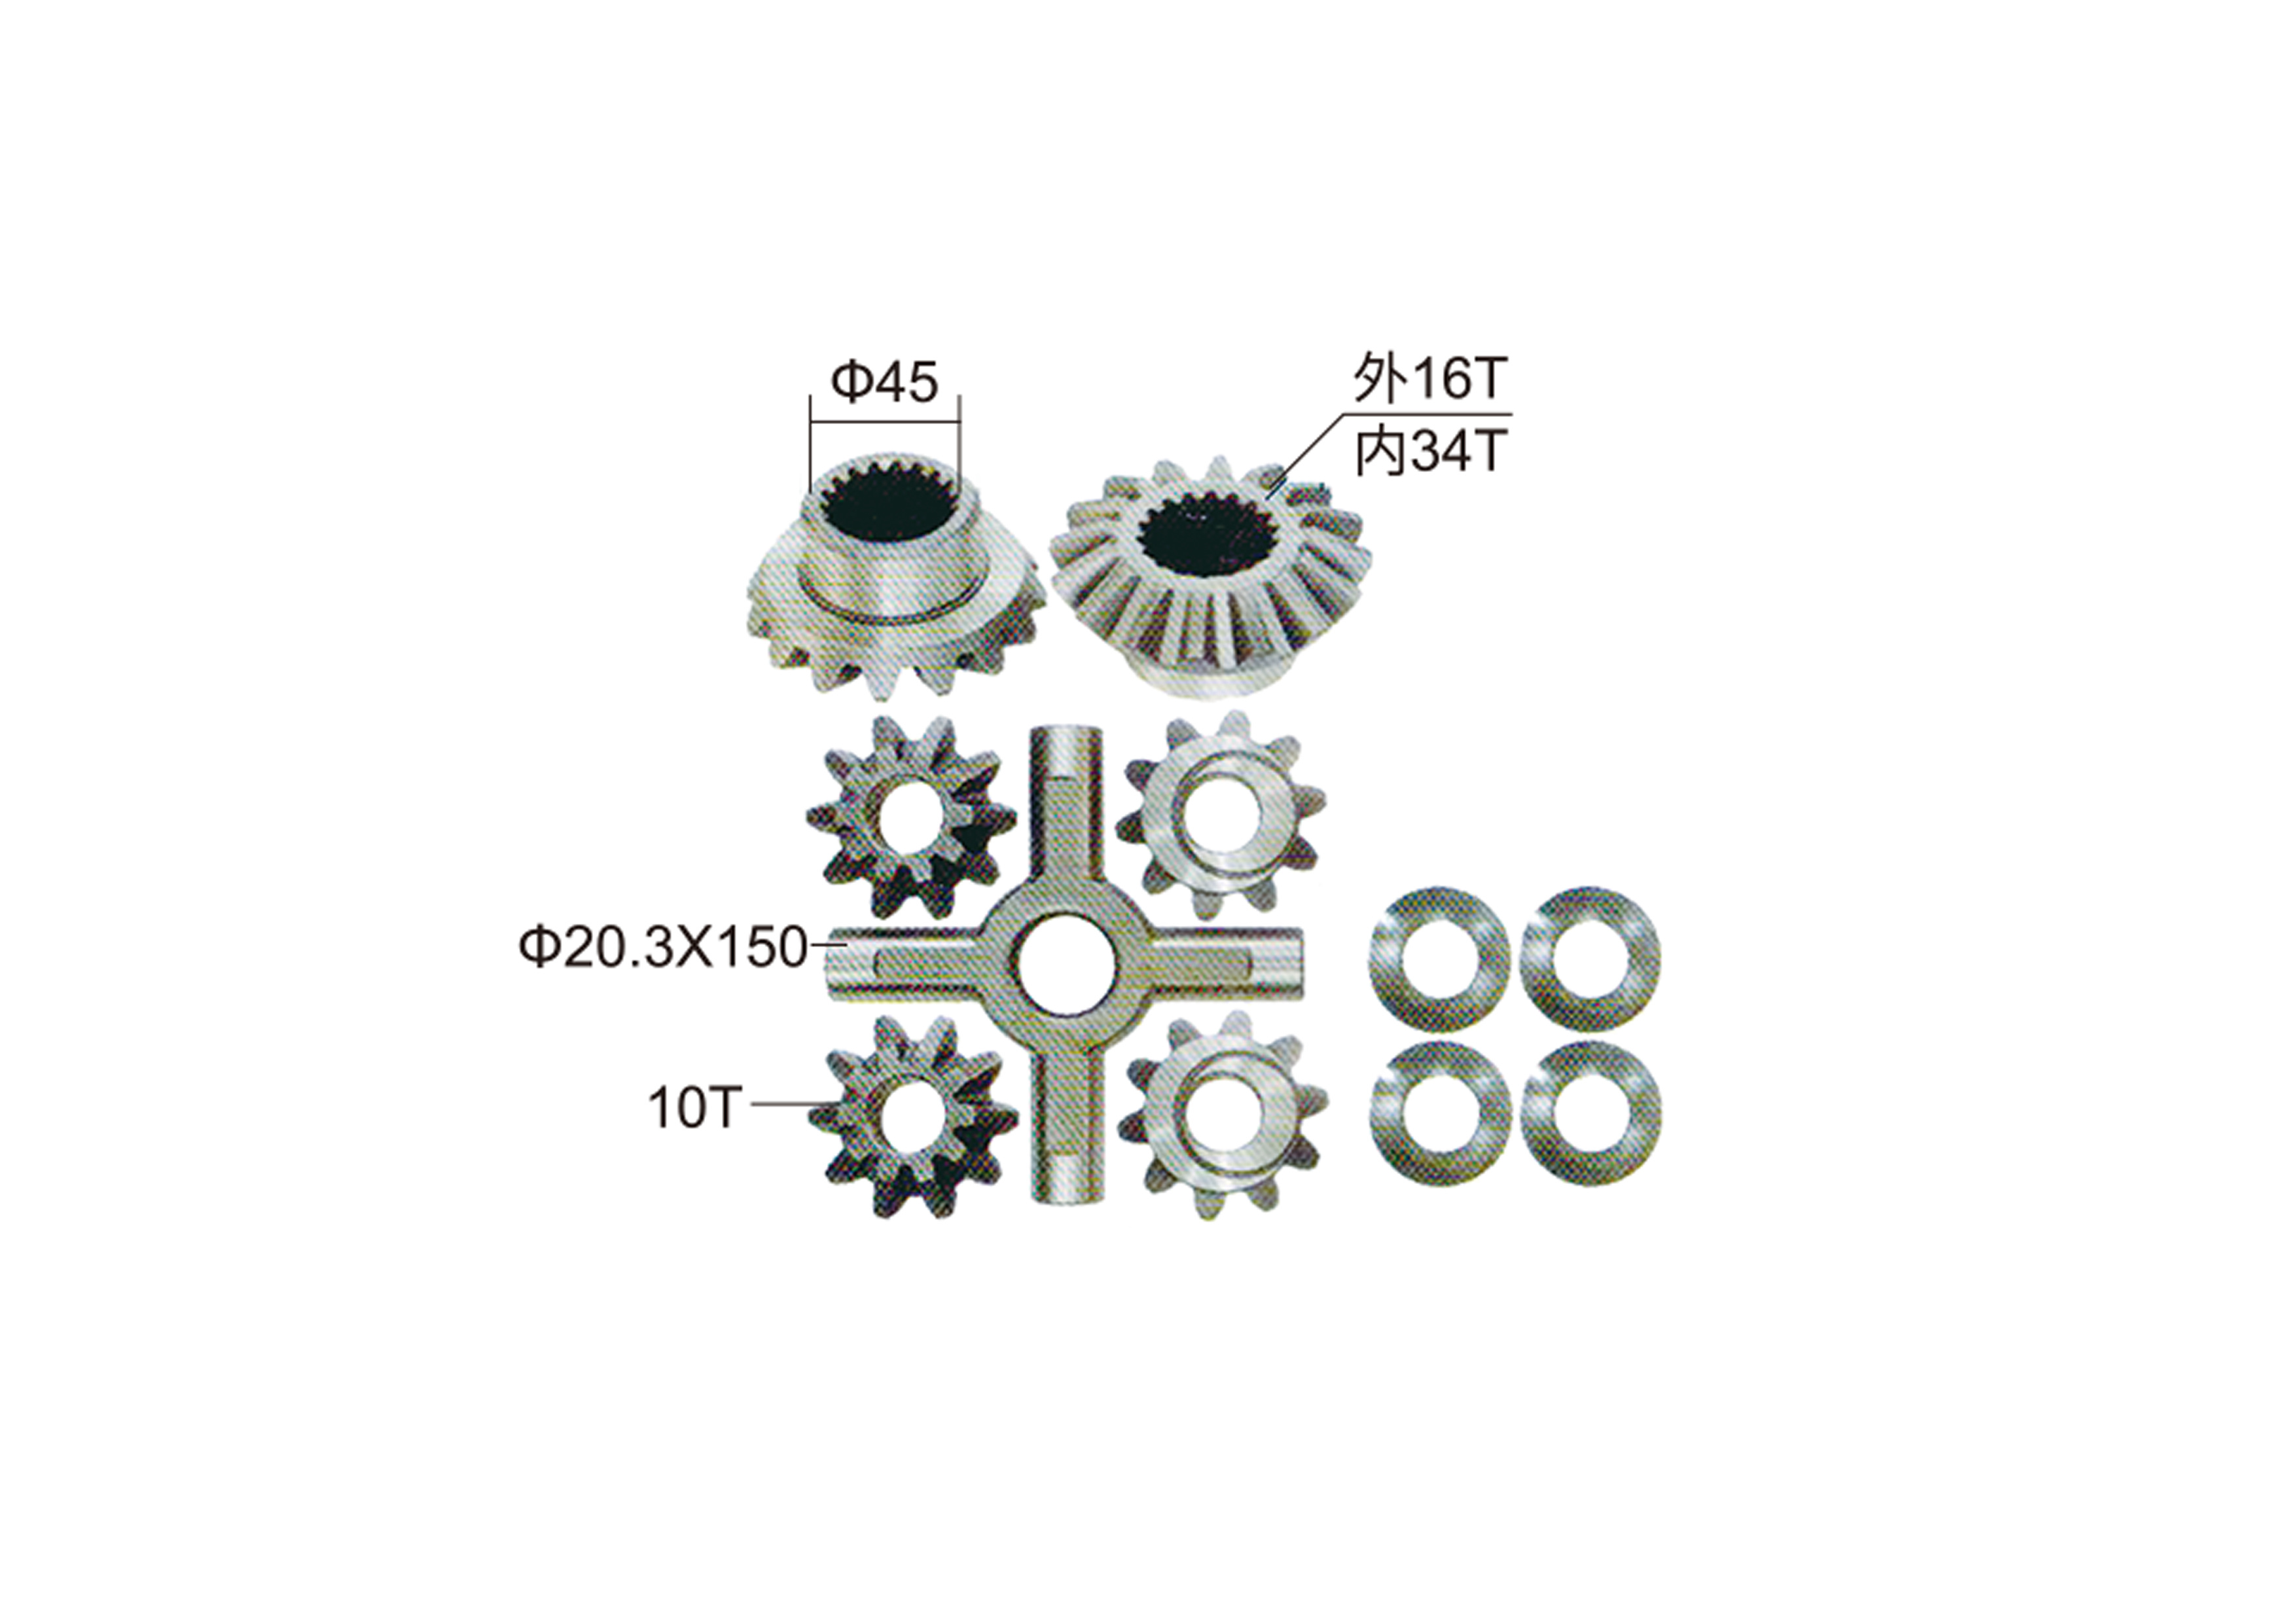 Differential Spider Gear Kit For Nissan Spider Size 20.3*150